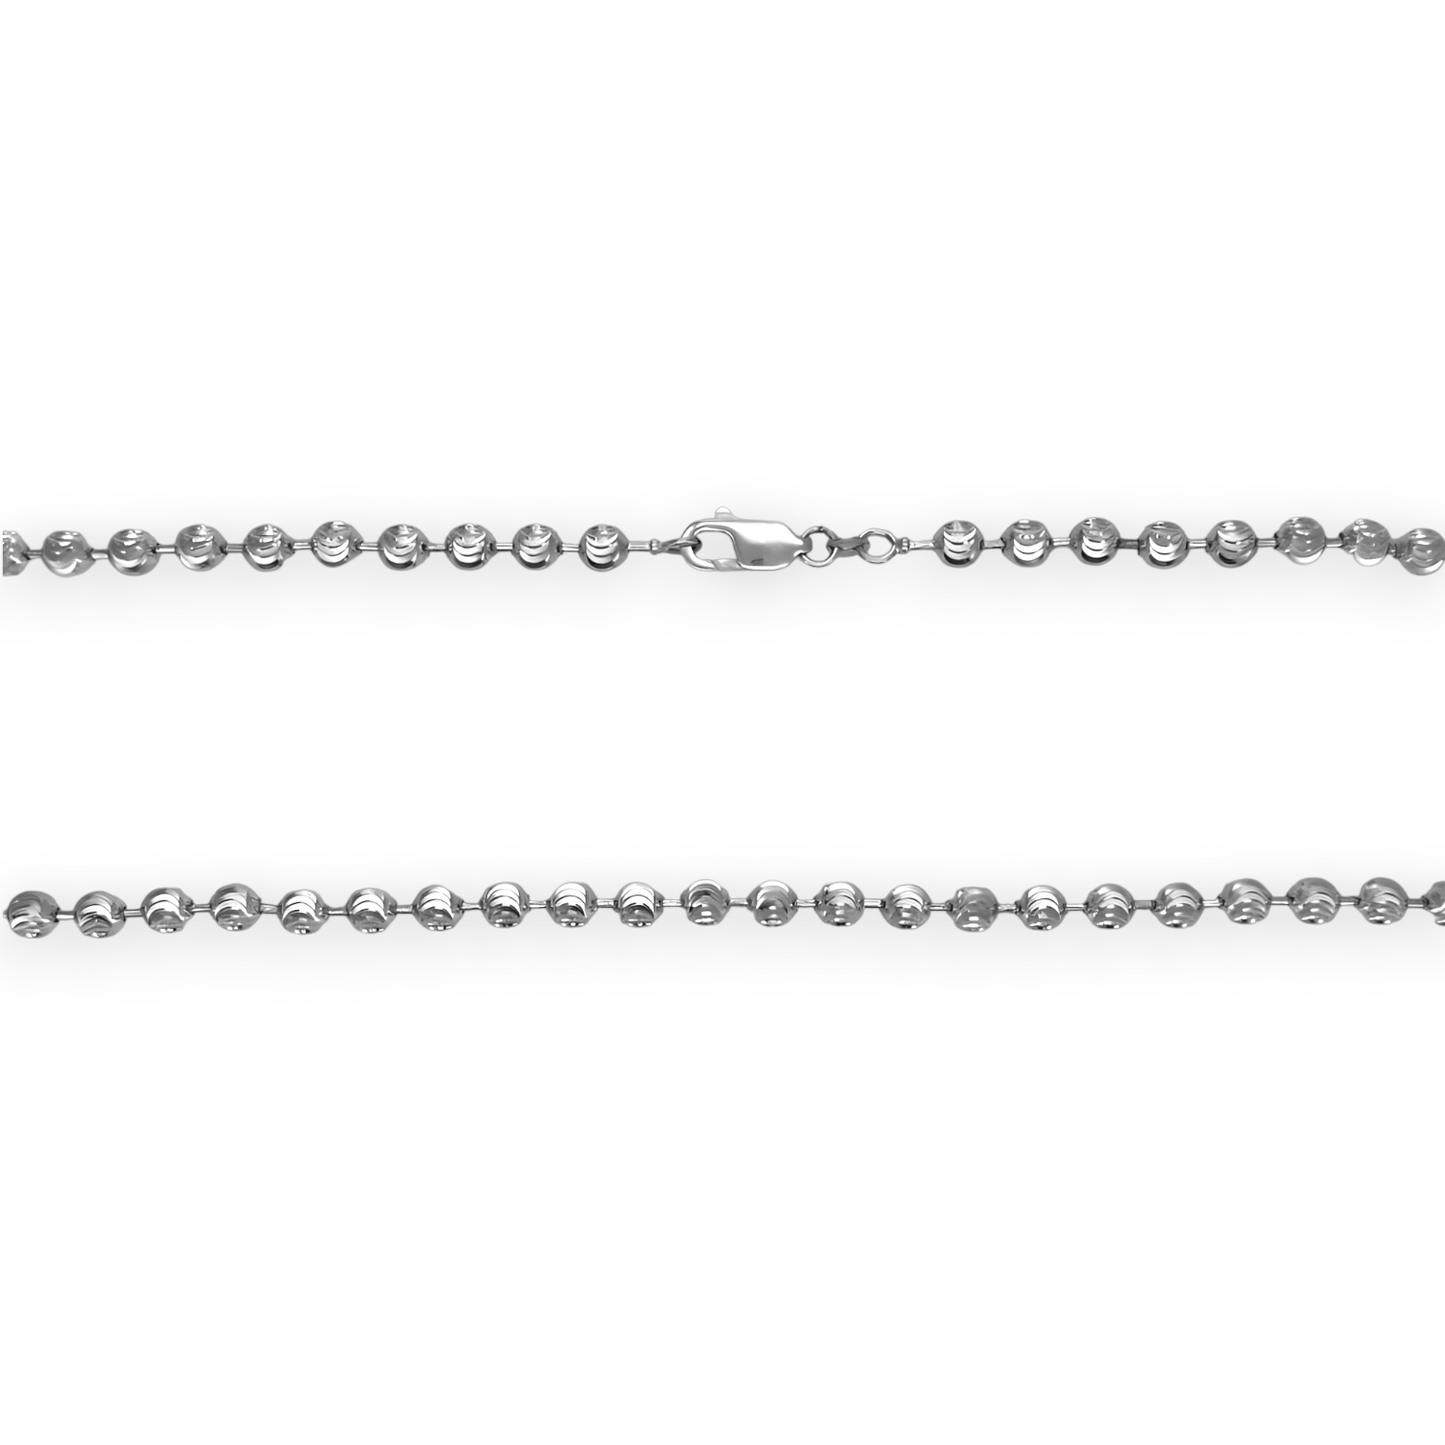 Bead Ball Moon Cut Link Chain Necklace - 14K White Gold - Solid